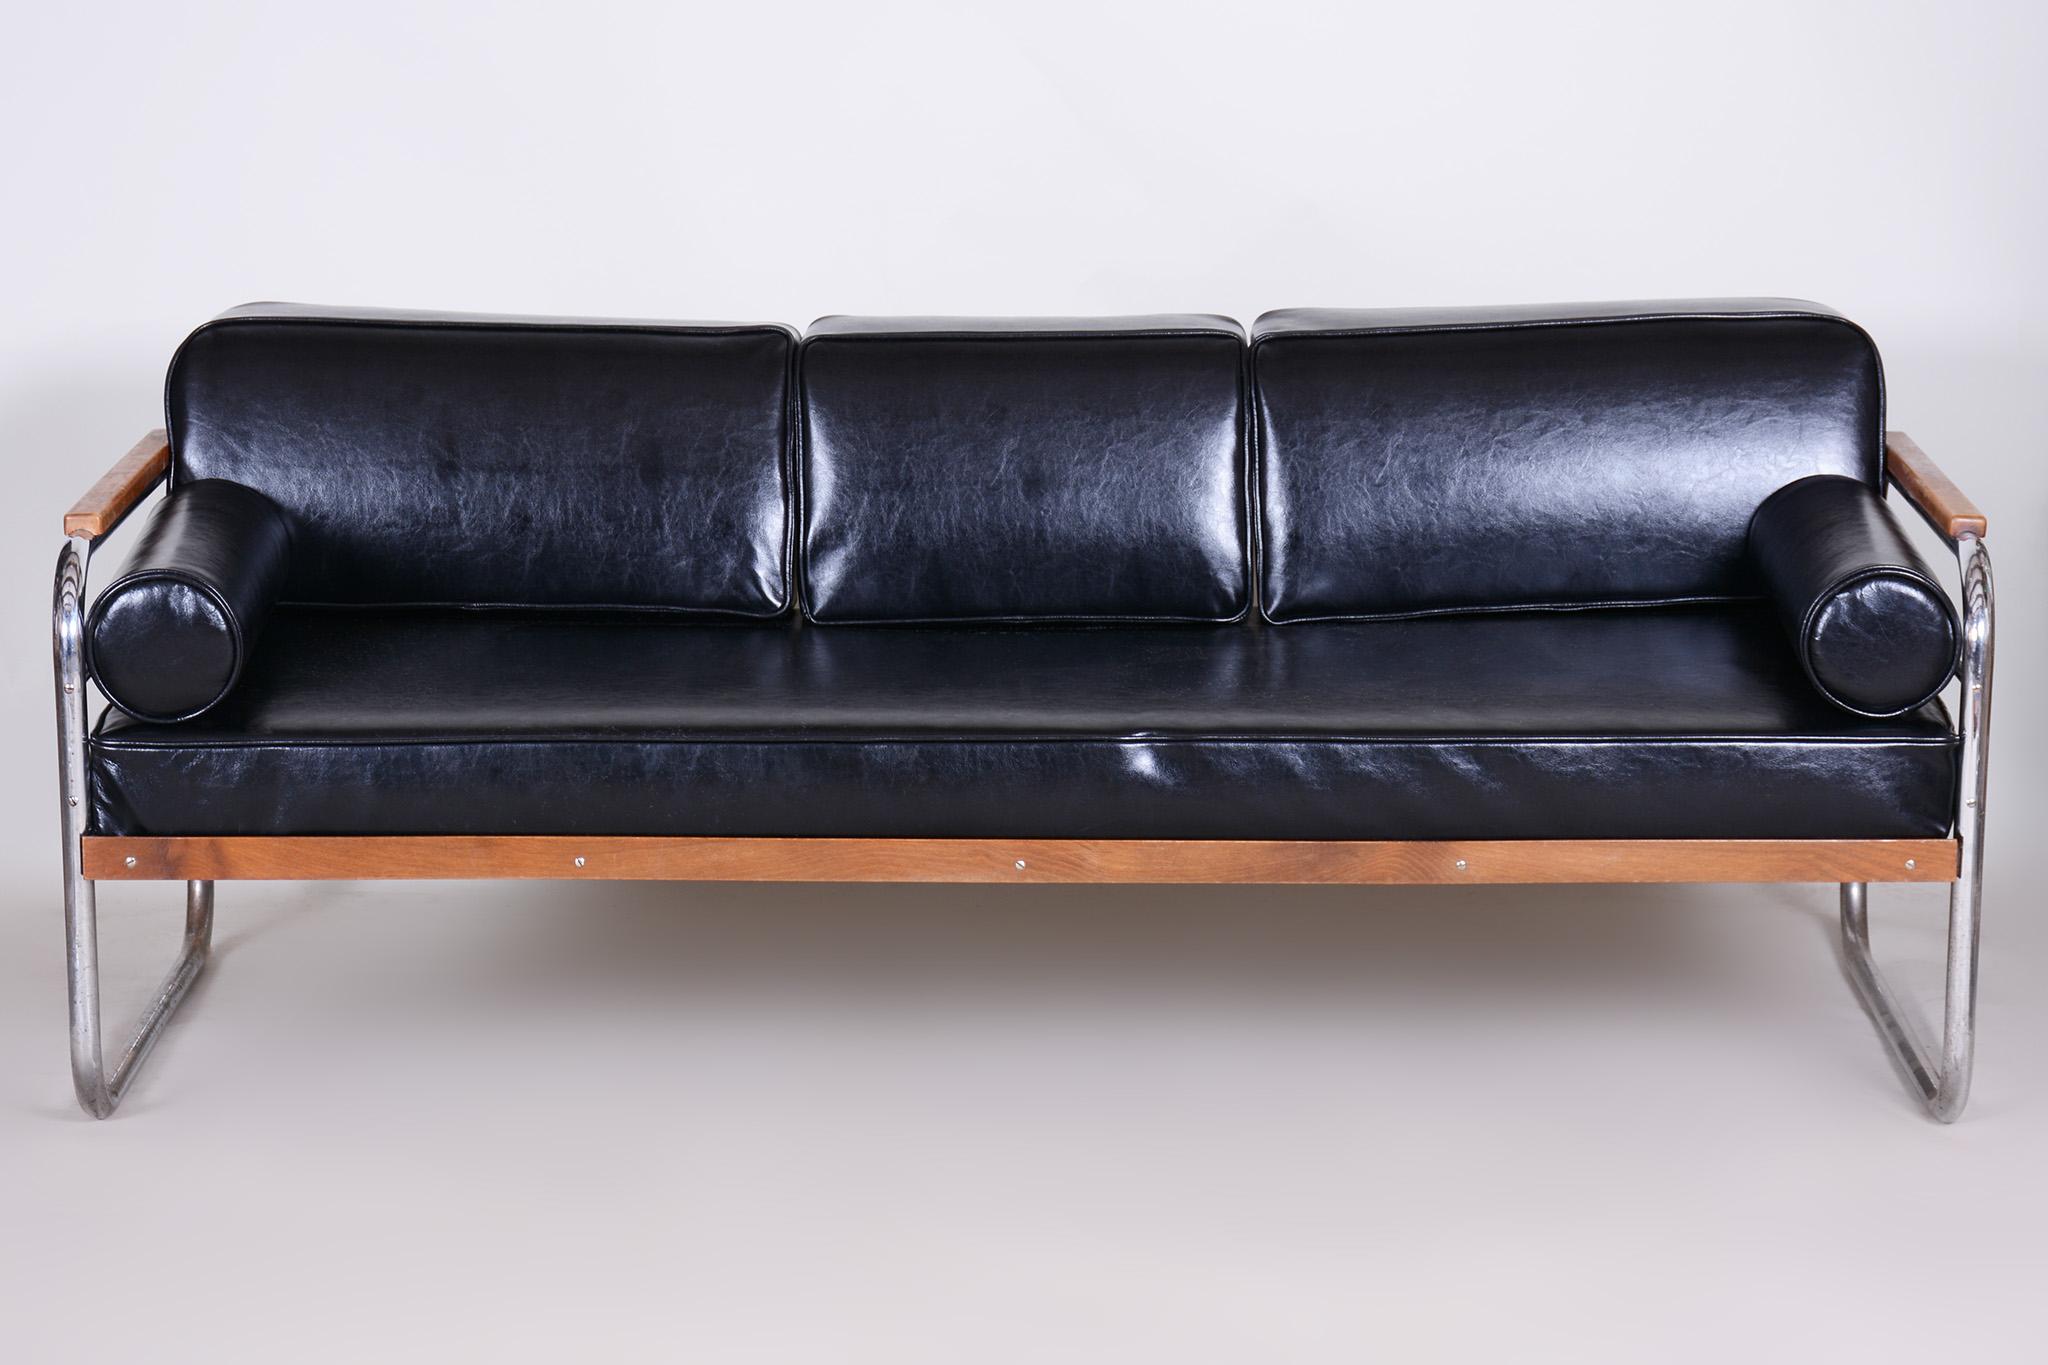 Black Leather Sofa Made by Thonet in 1930s Czechia In Good Condition For Sale In Horomerice, CZ